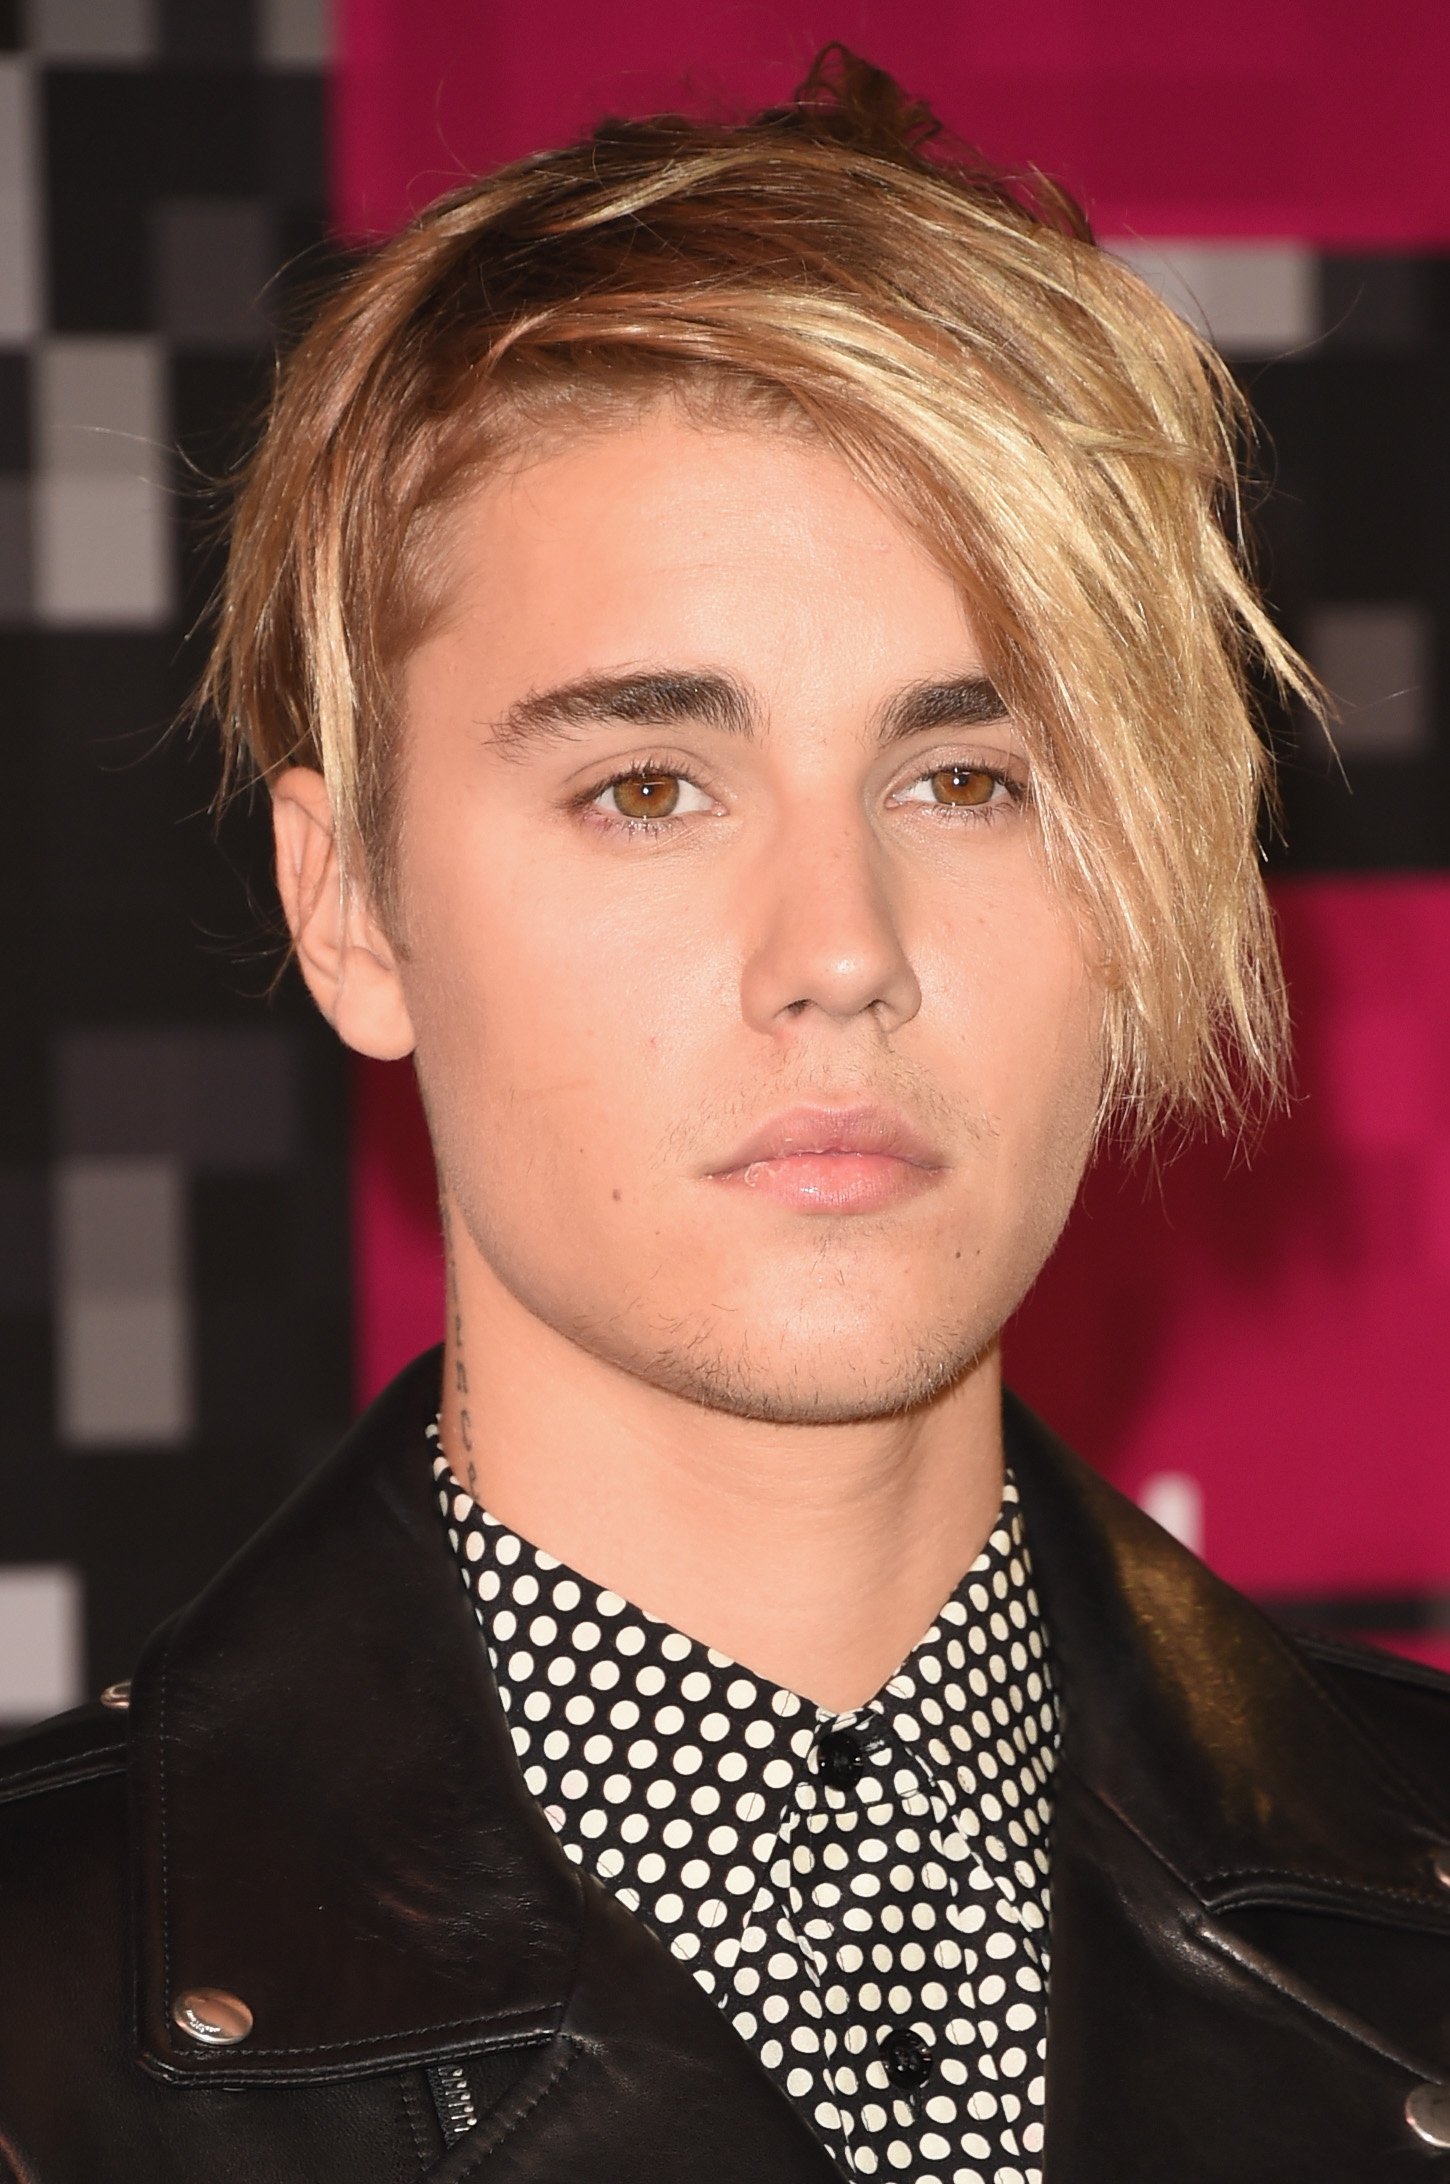 Justin Bieber at the 2015 MTV Video Music Awards in Los Angeles on Aug. 30, 2015.